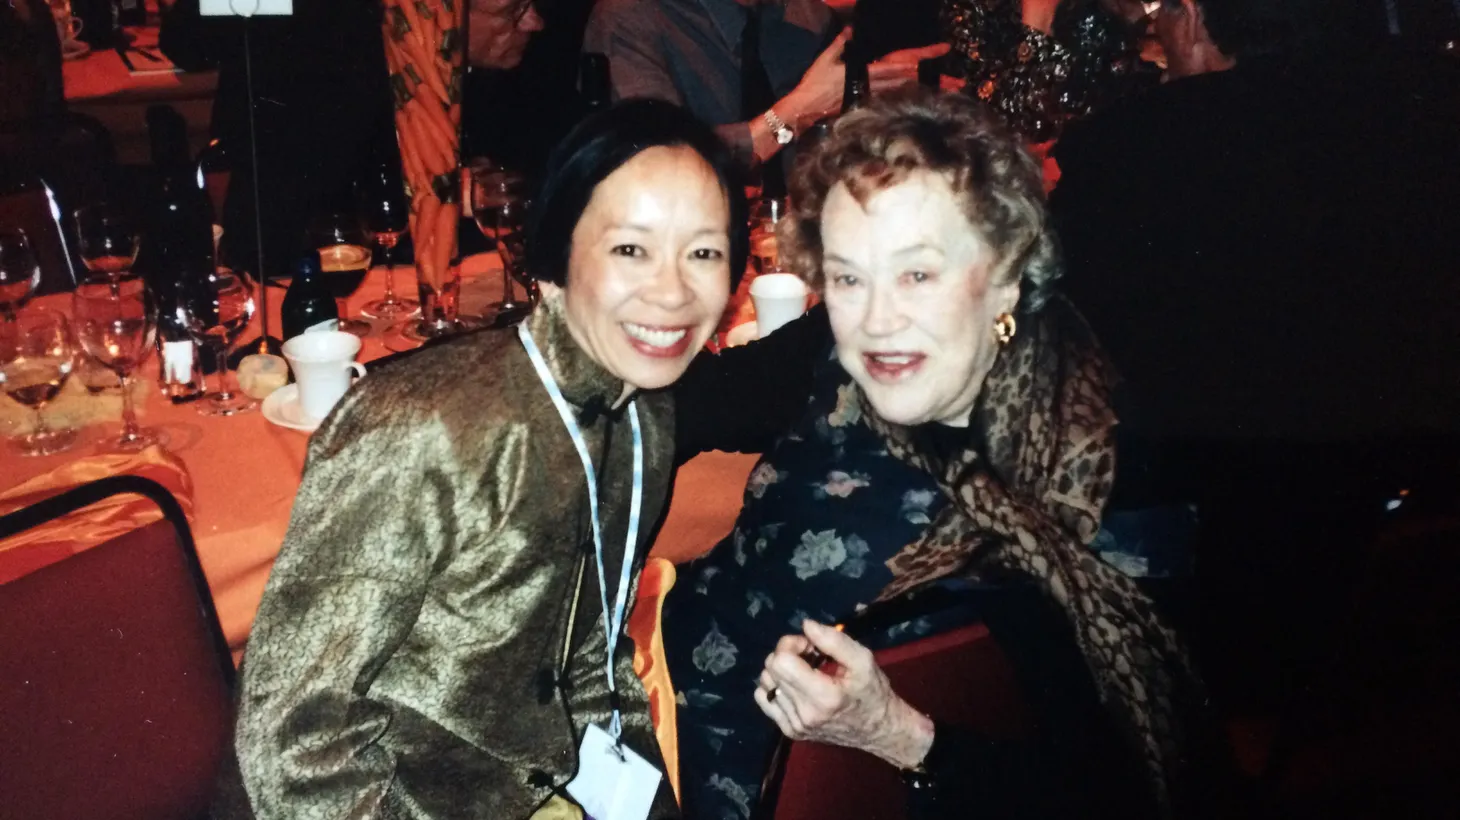 A self-described “Julia Child fangirl,” Grace Young (left) recalls discovering the culinary icon on television as a child and sending in self-addressed envelopes to receive a recipe each week. This month, Young will be honored with the Julia Child Award in Washington, D.C.